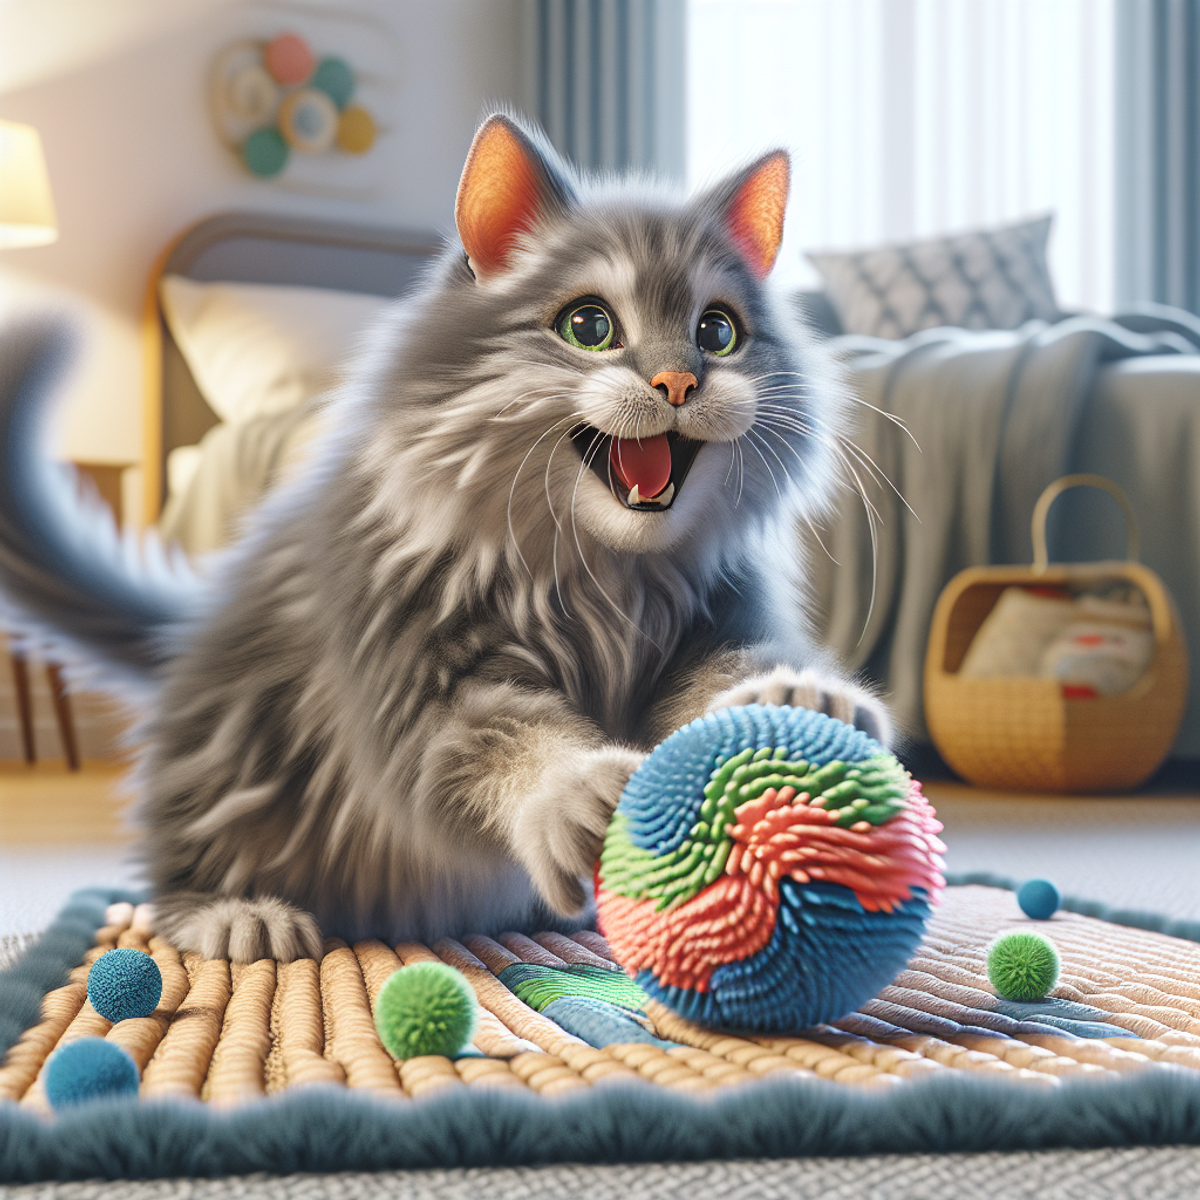 A senior grey cat happily playing with a colorful ball and a crinkly play mat.